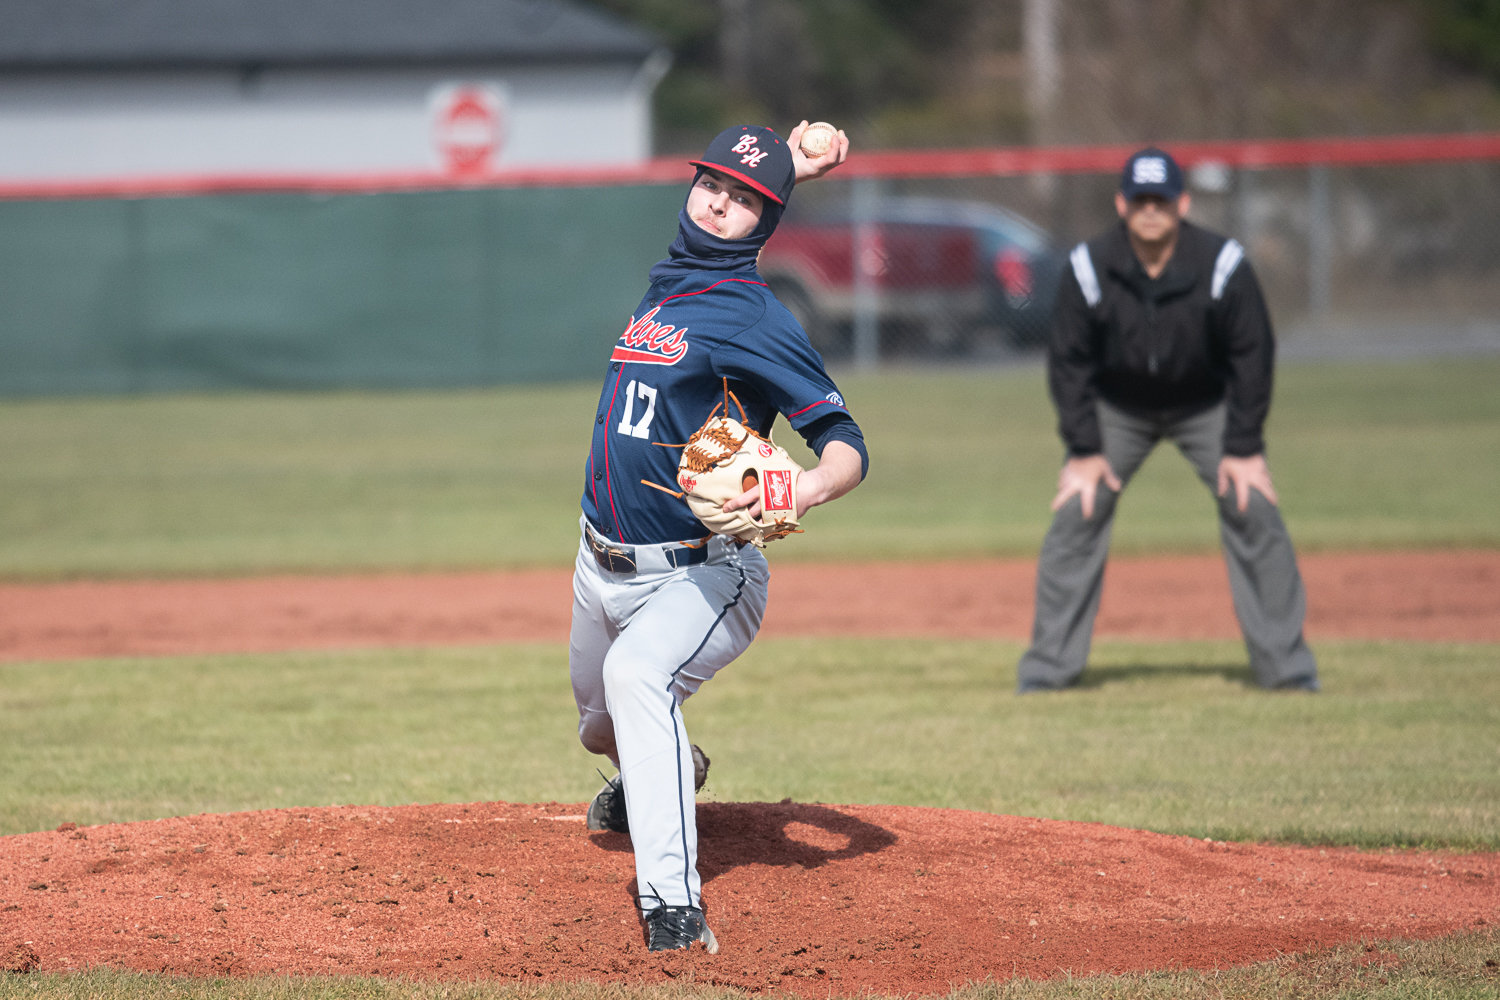 Xander Shepler throws a pitch during Black Hills' 7-4 loss at Tenino on March 14.